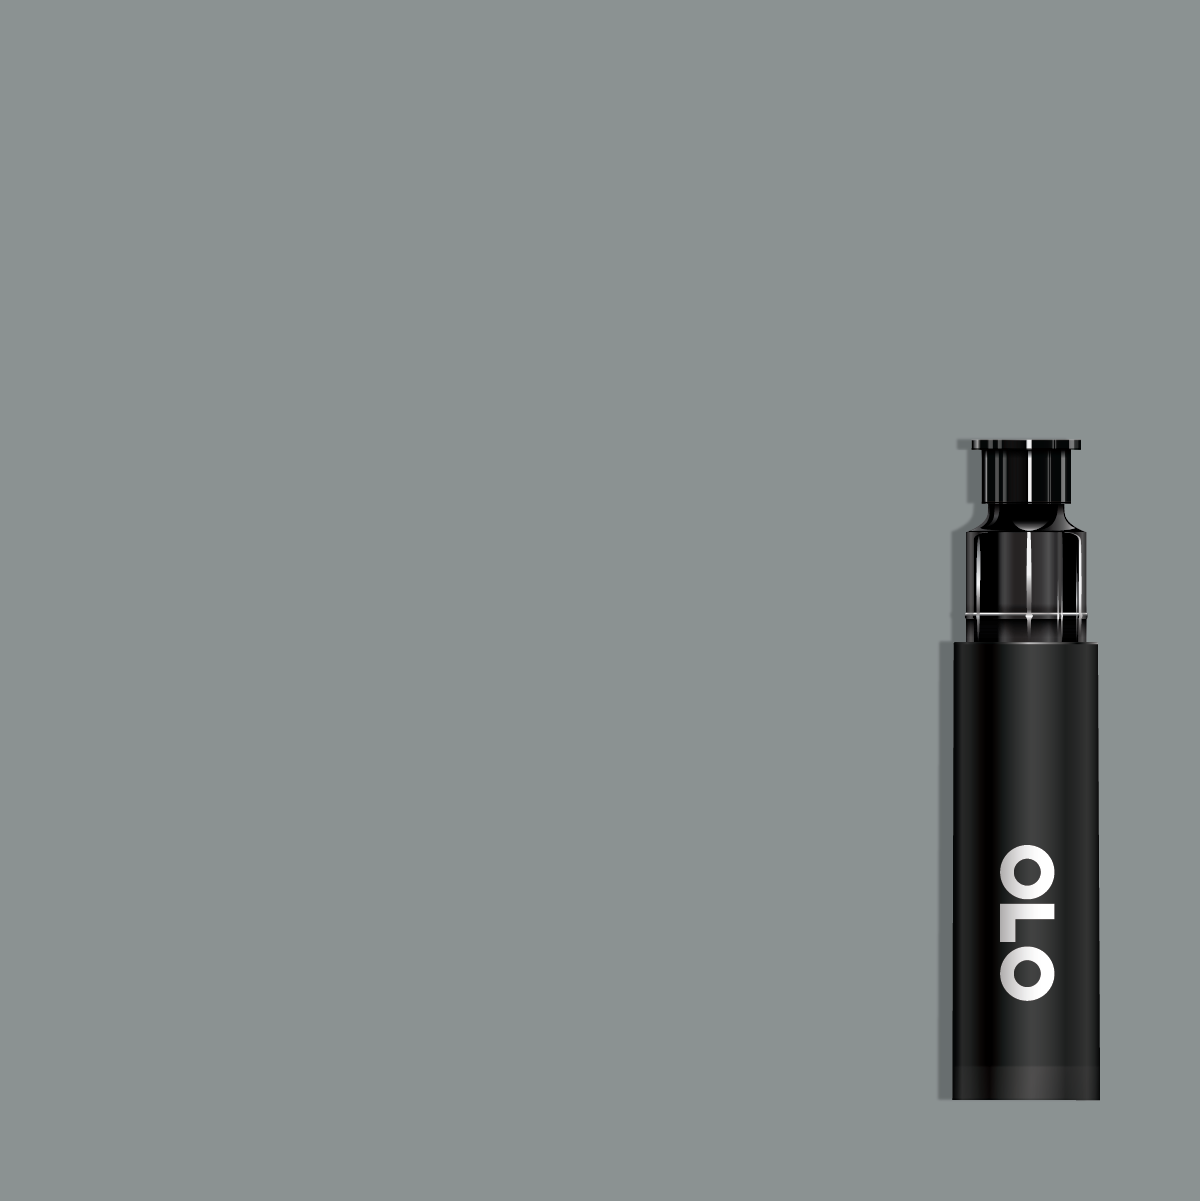 OLO CG3 Cool Gray 3 Replacement Cartridge